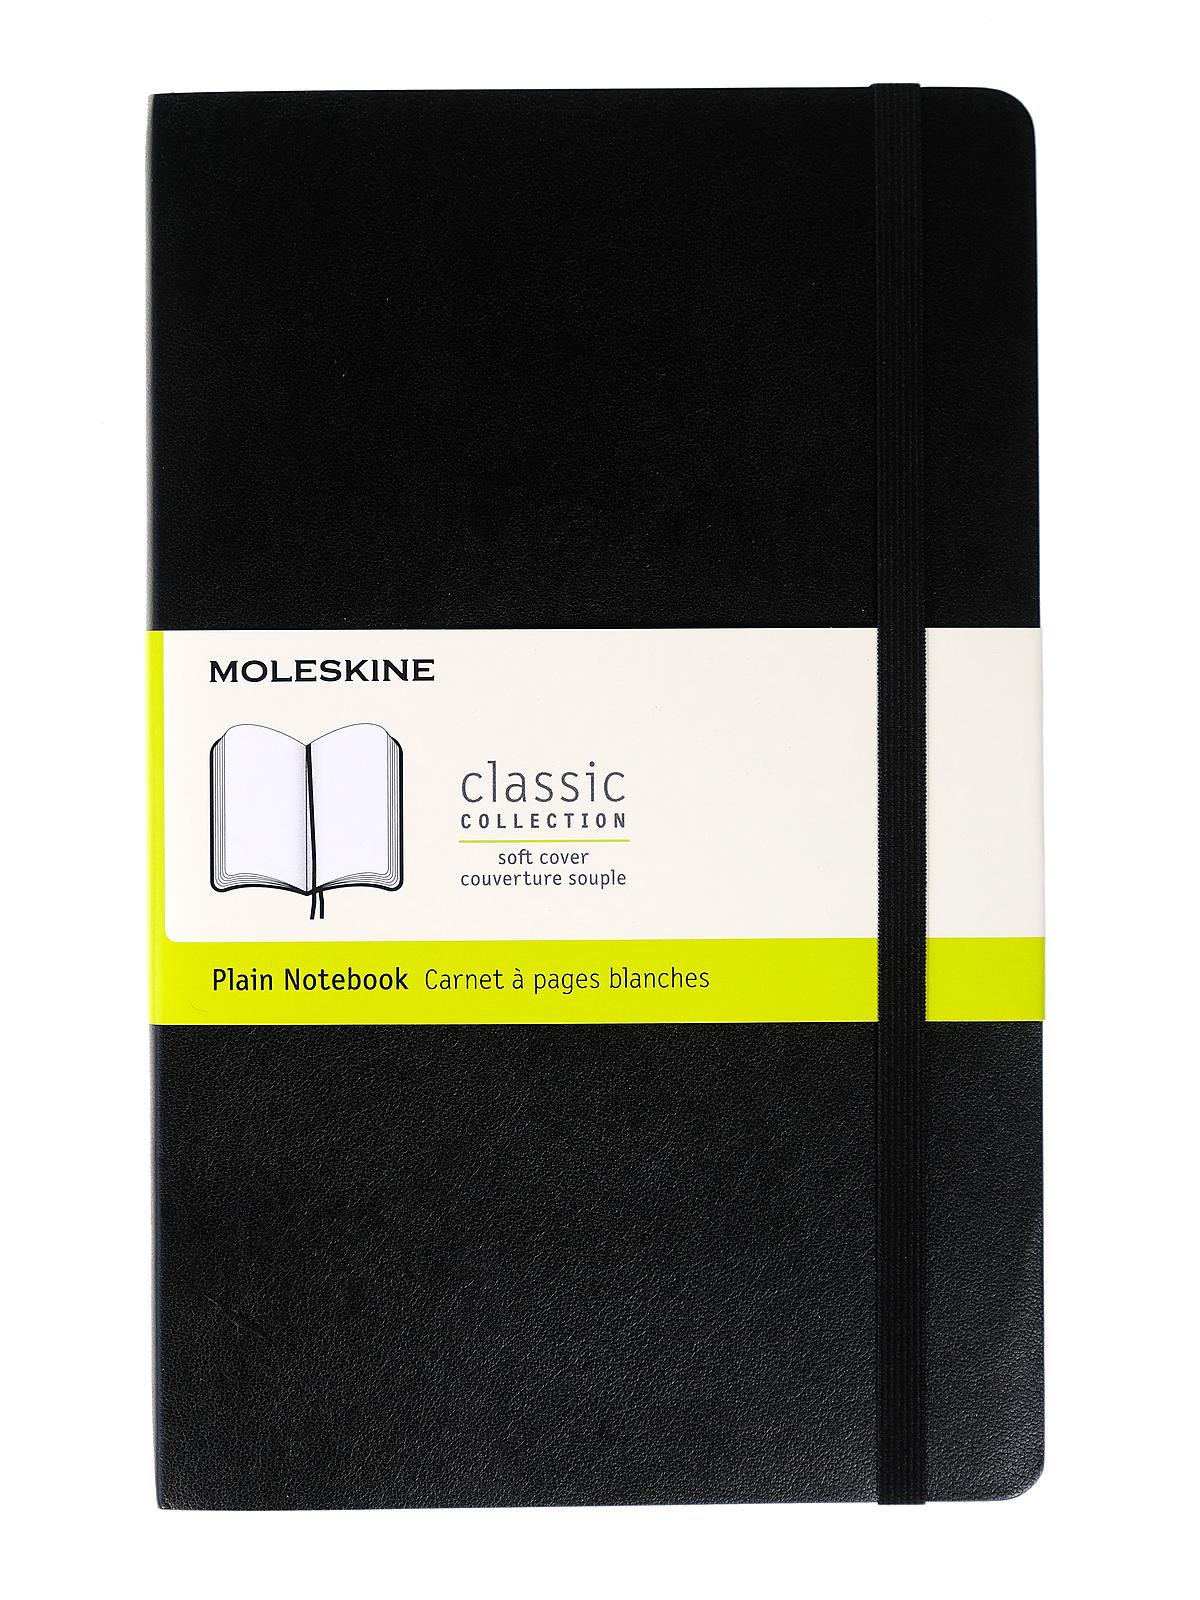 Classic Soft Cover Notebooks Black 5 In. X 8 1 4 In. 400 Pages, Unlined